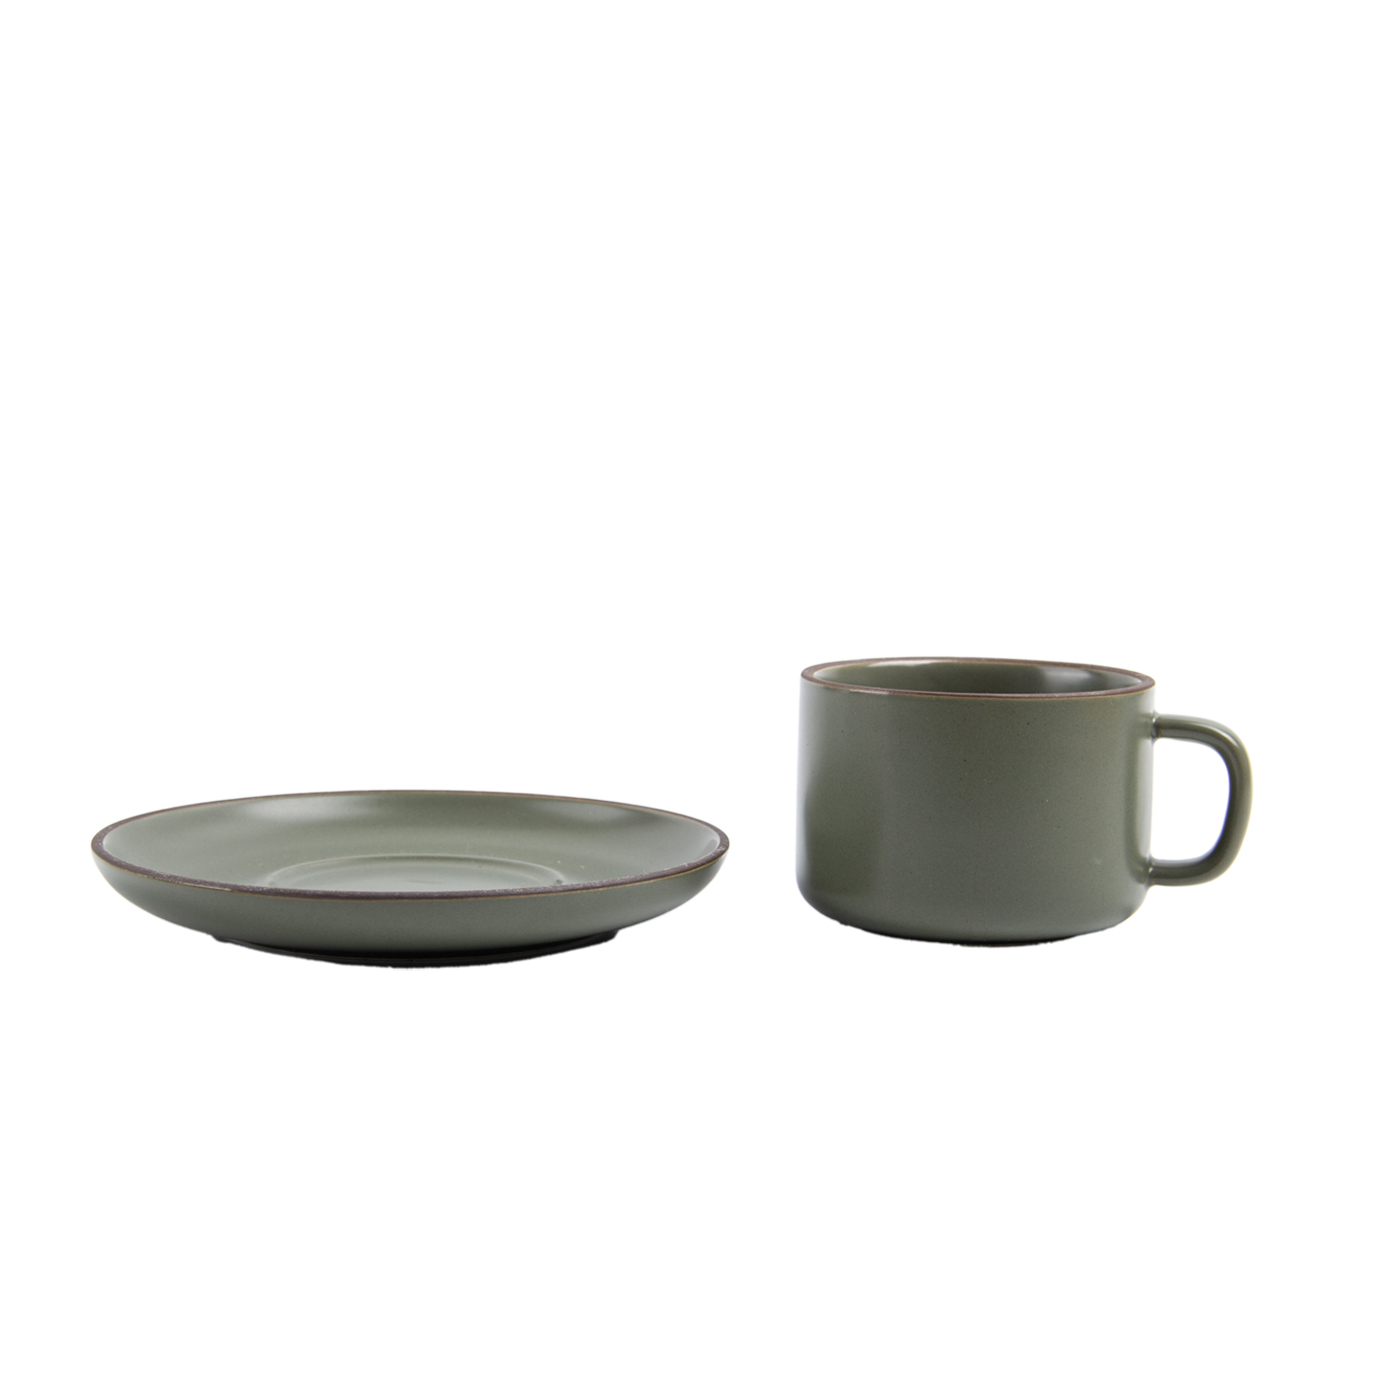 8 oz. Ceramic Coffee Cup With Saucer2